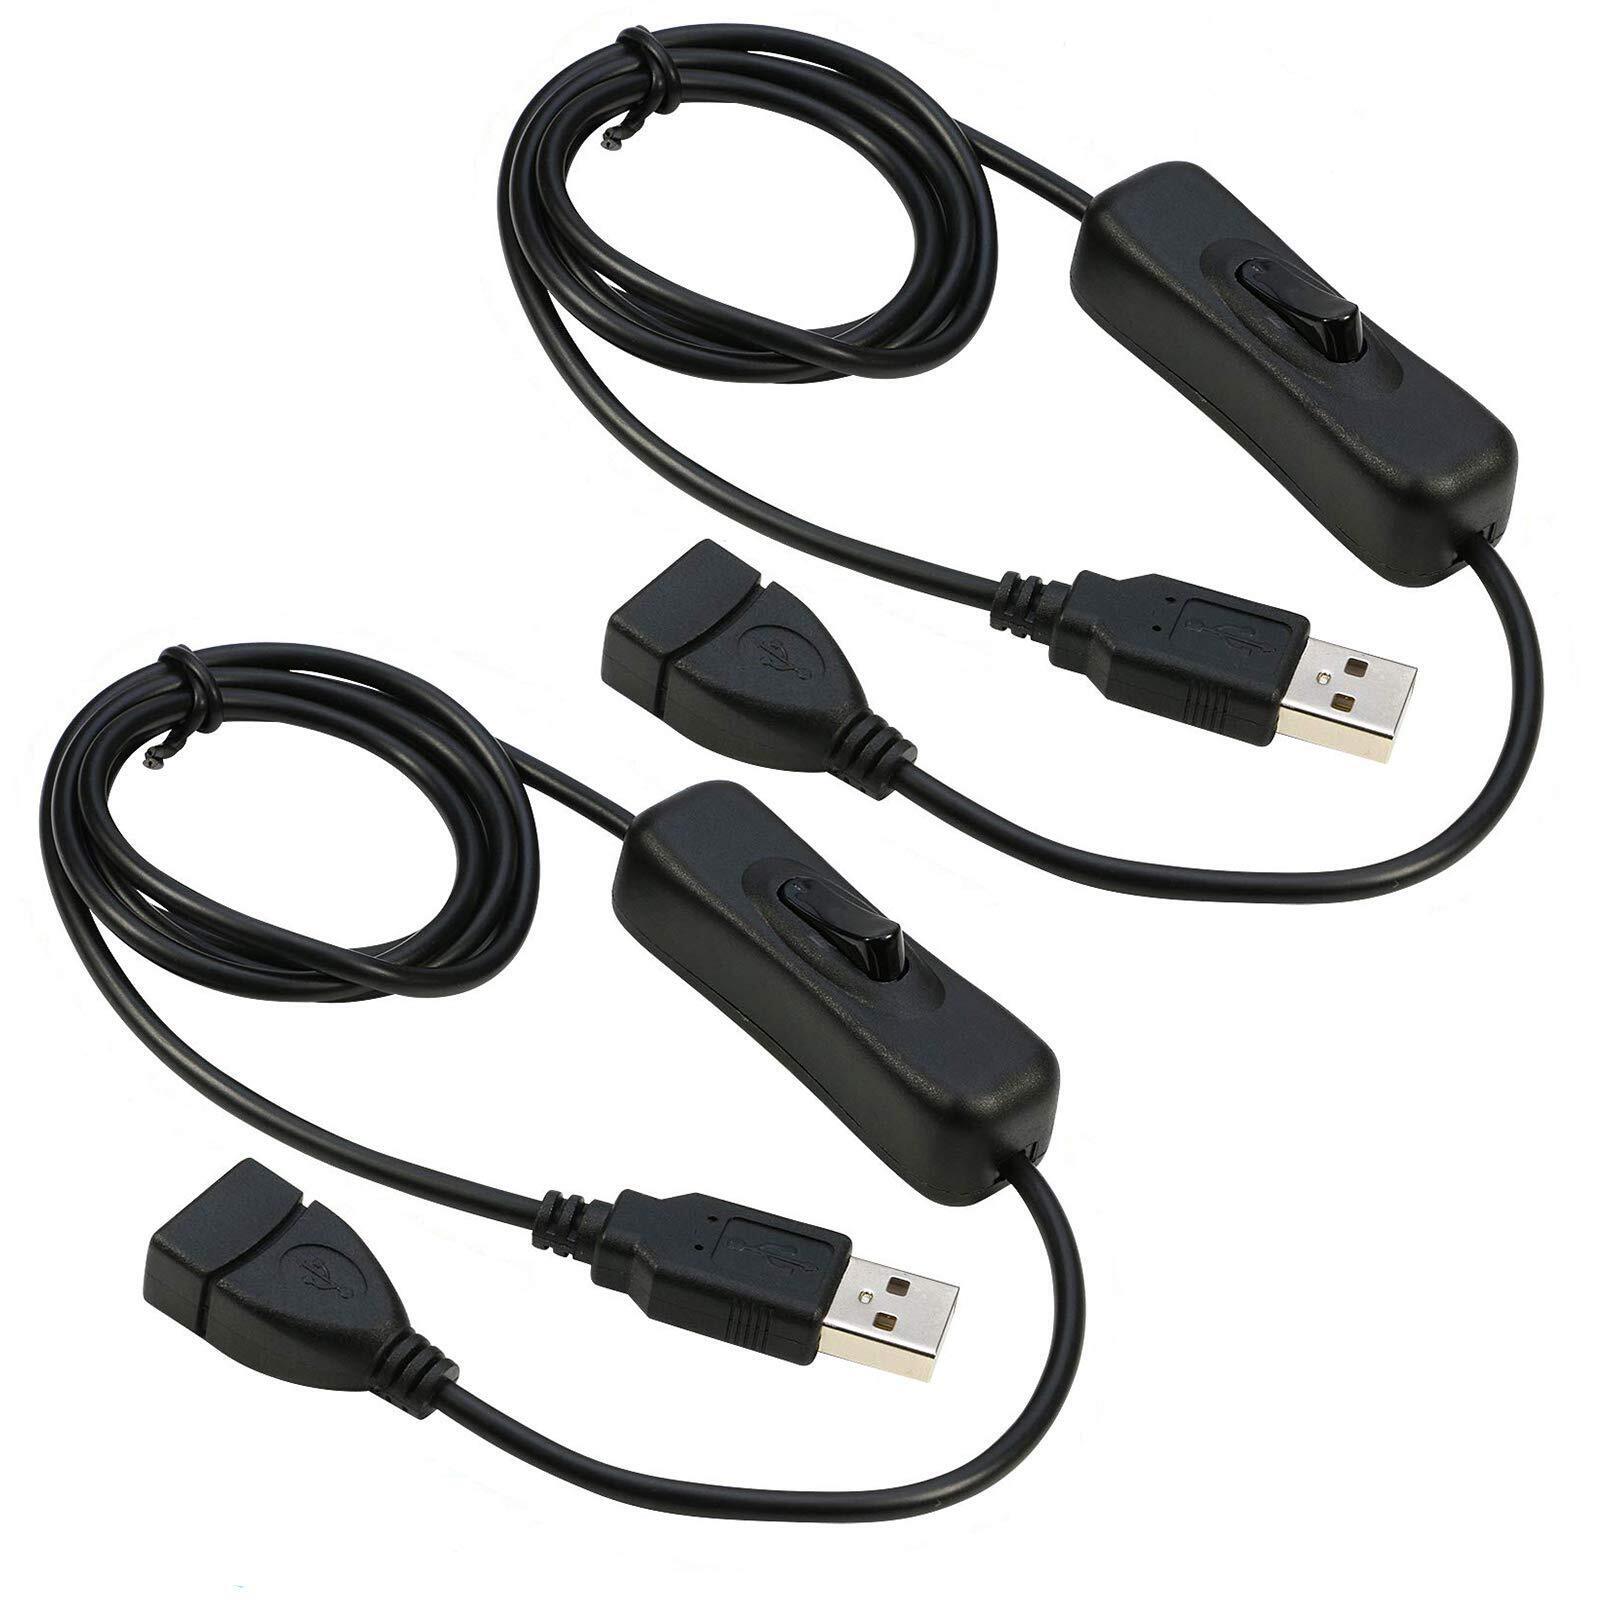 Dfsucces USB Extension Cable 2Pcs with On/Off Switch USB Male to Female Cable